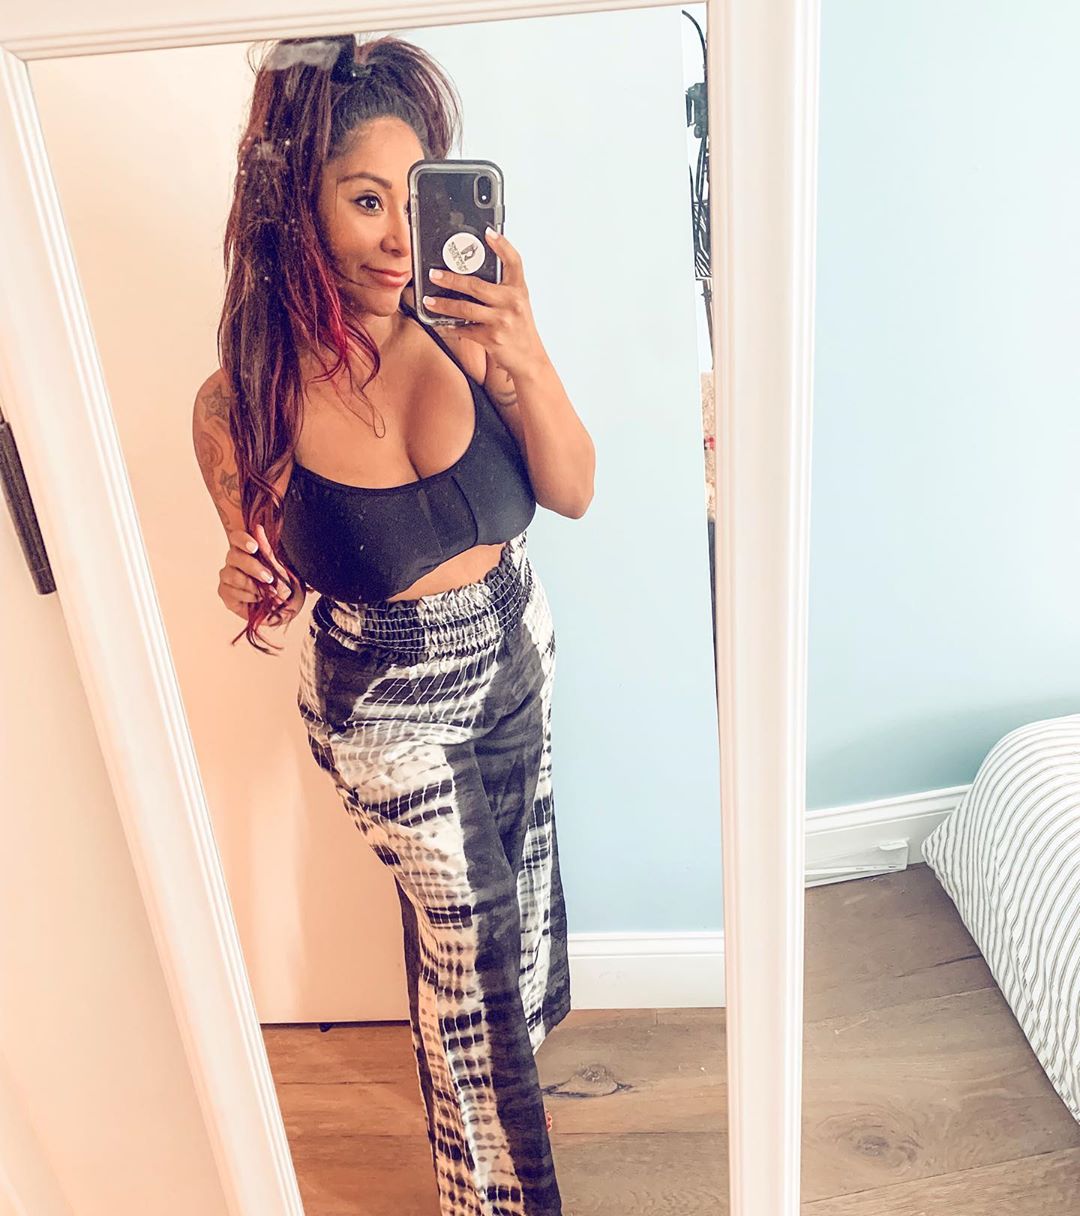 Snooki Offers Sex: 'You Need a of Lube'